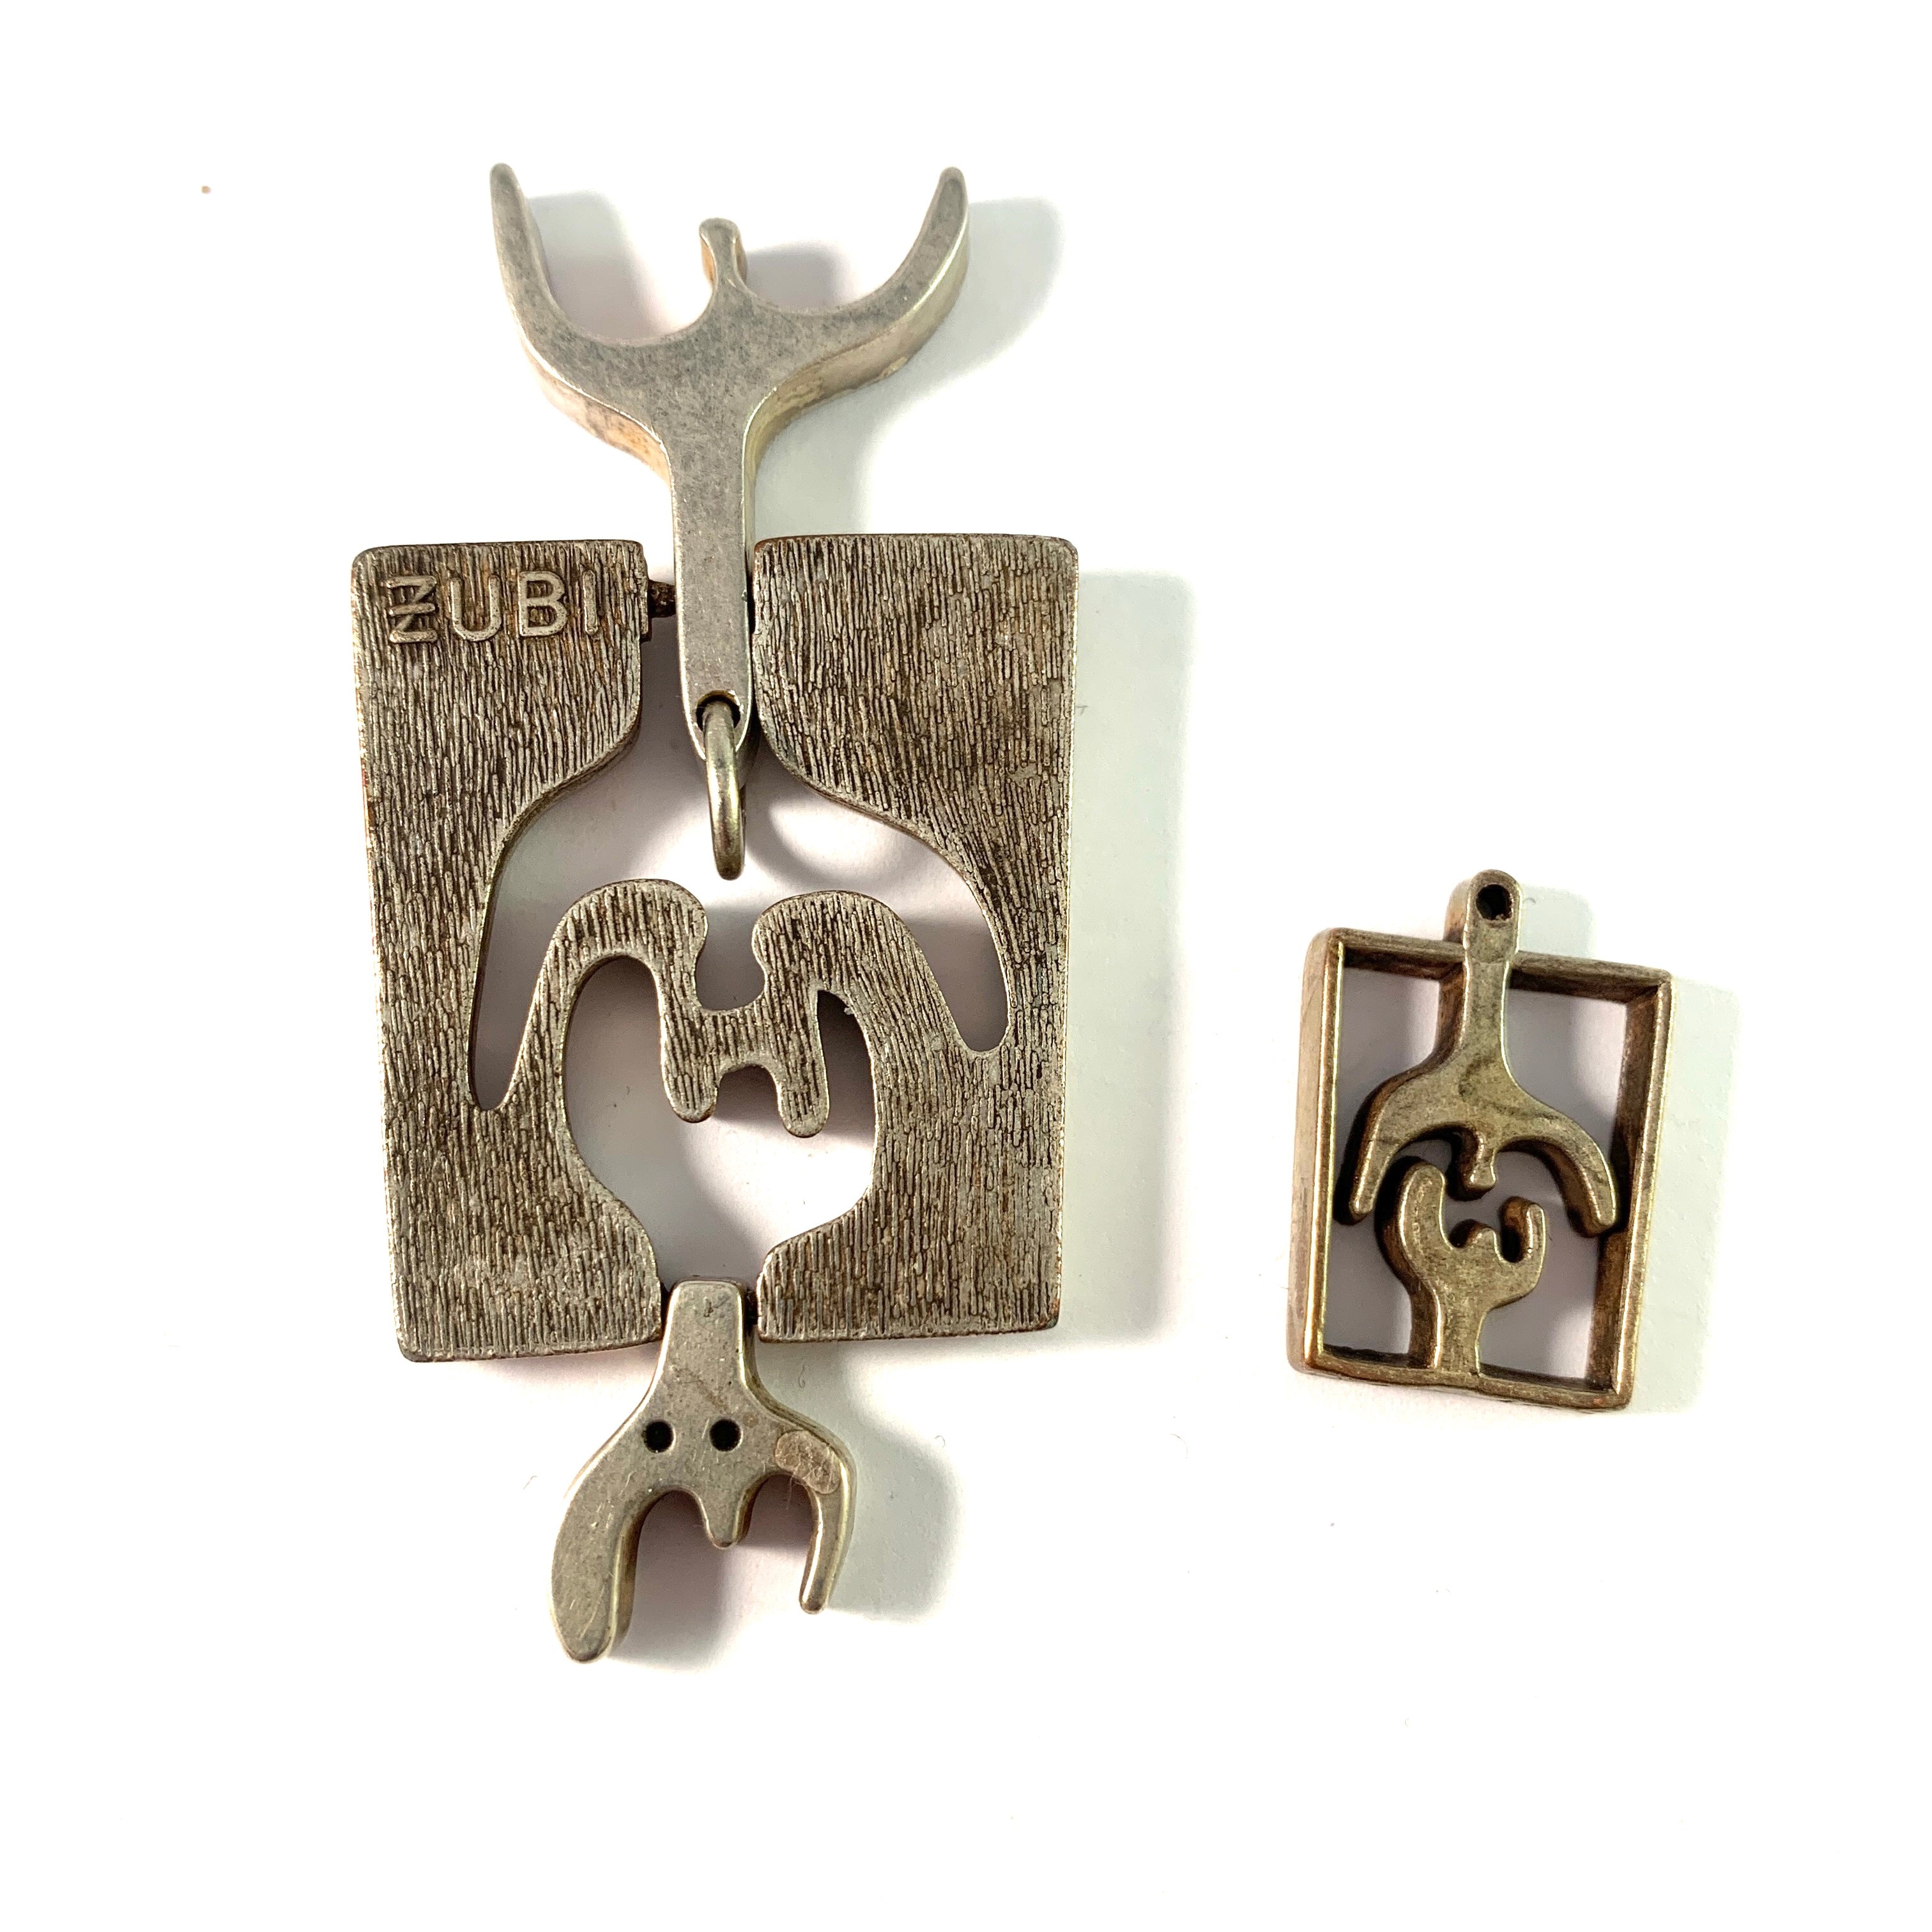 Francisco Baron, Spain 1970s. Vintage Numbered Metal ZUBI Pendant and Charm.